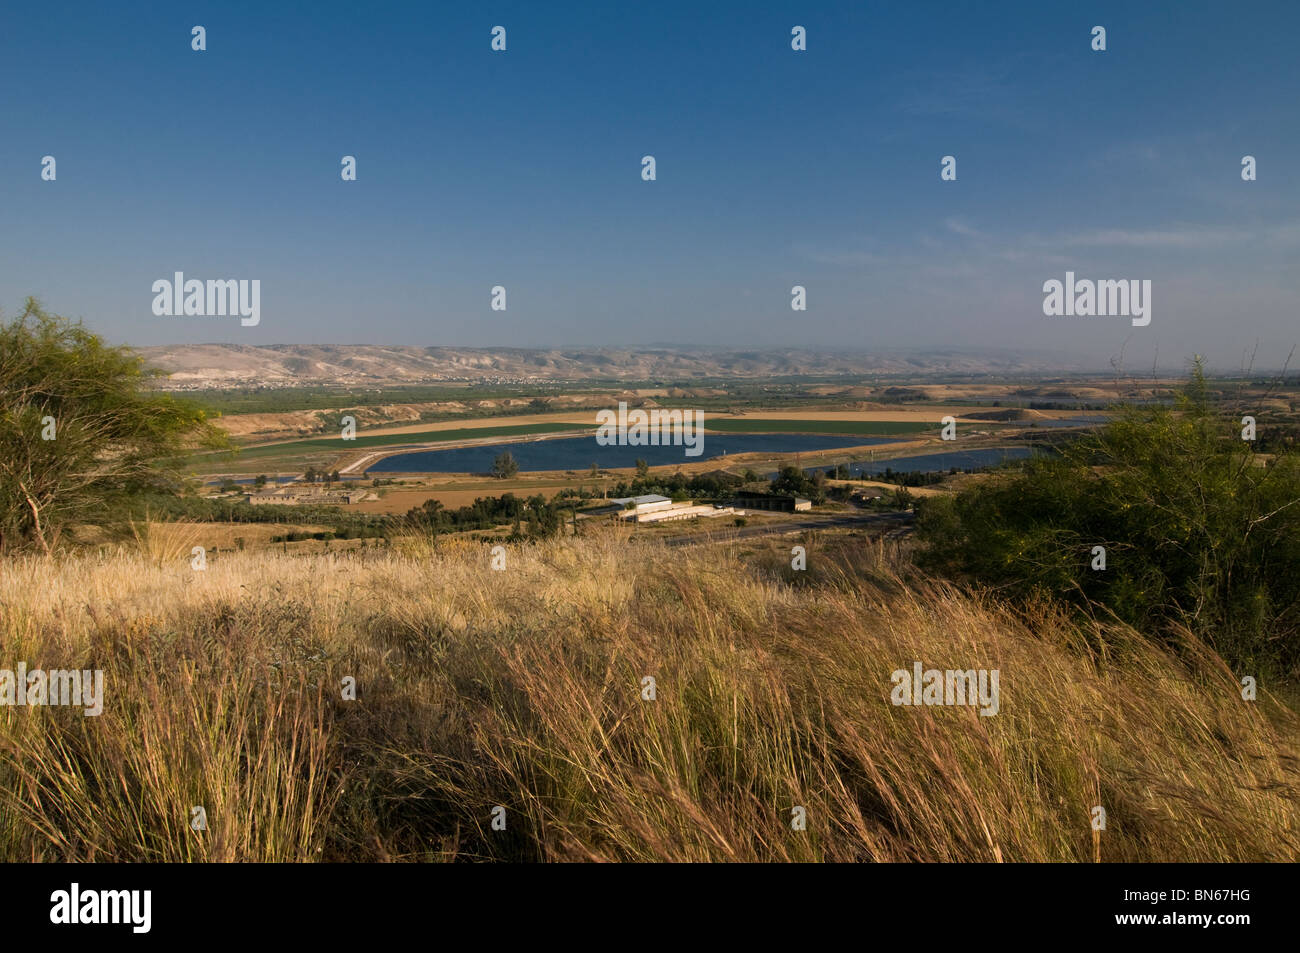 Scenic view of the Jordan valley near Israel Stock Photo